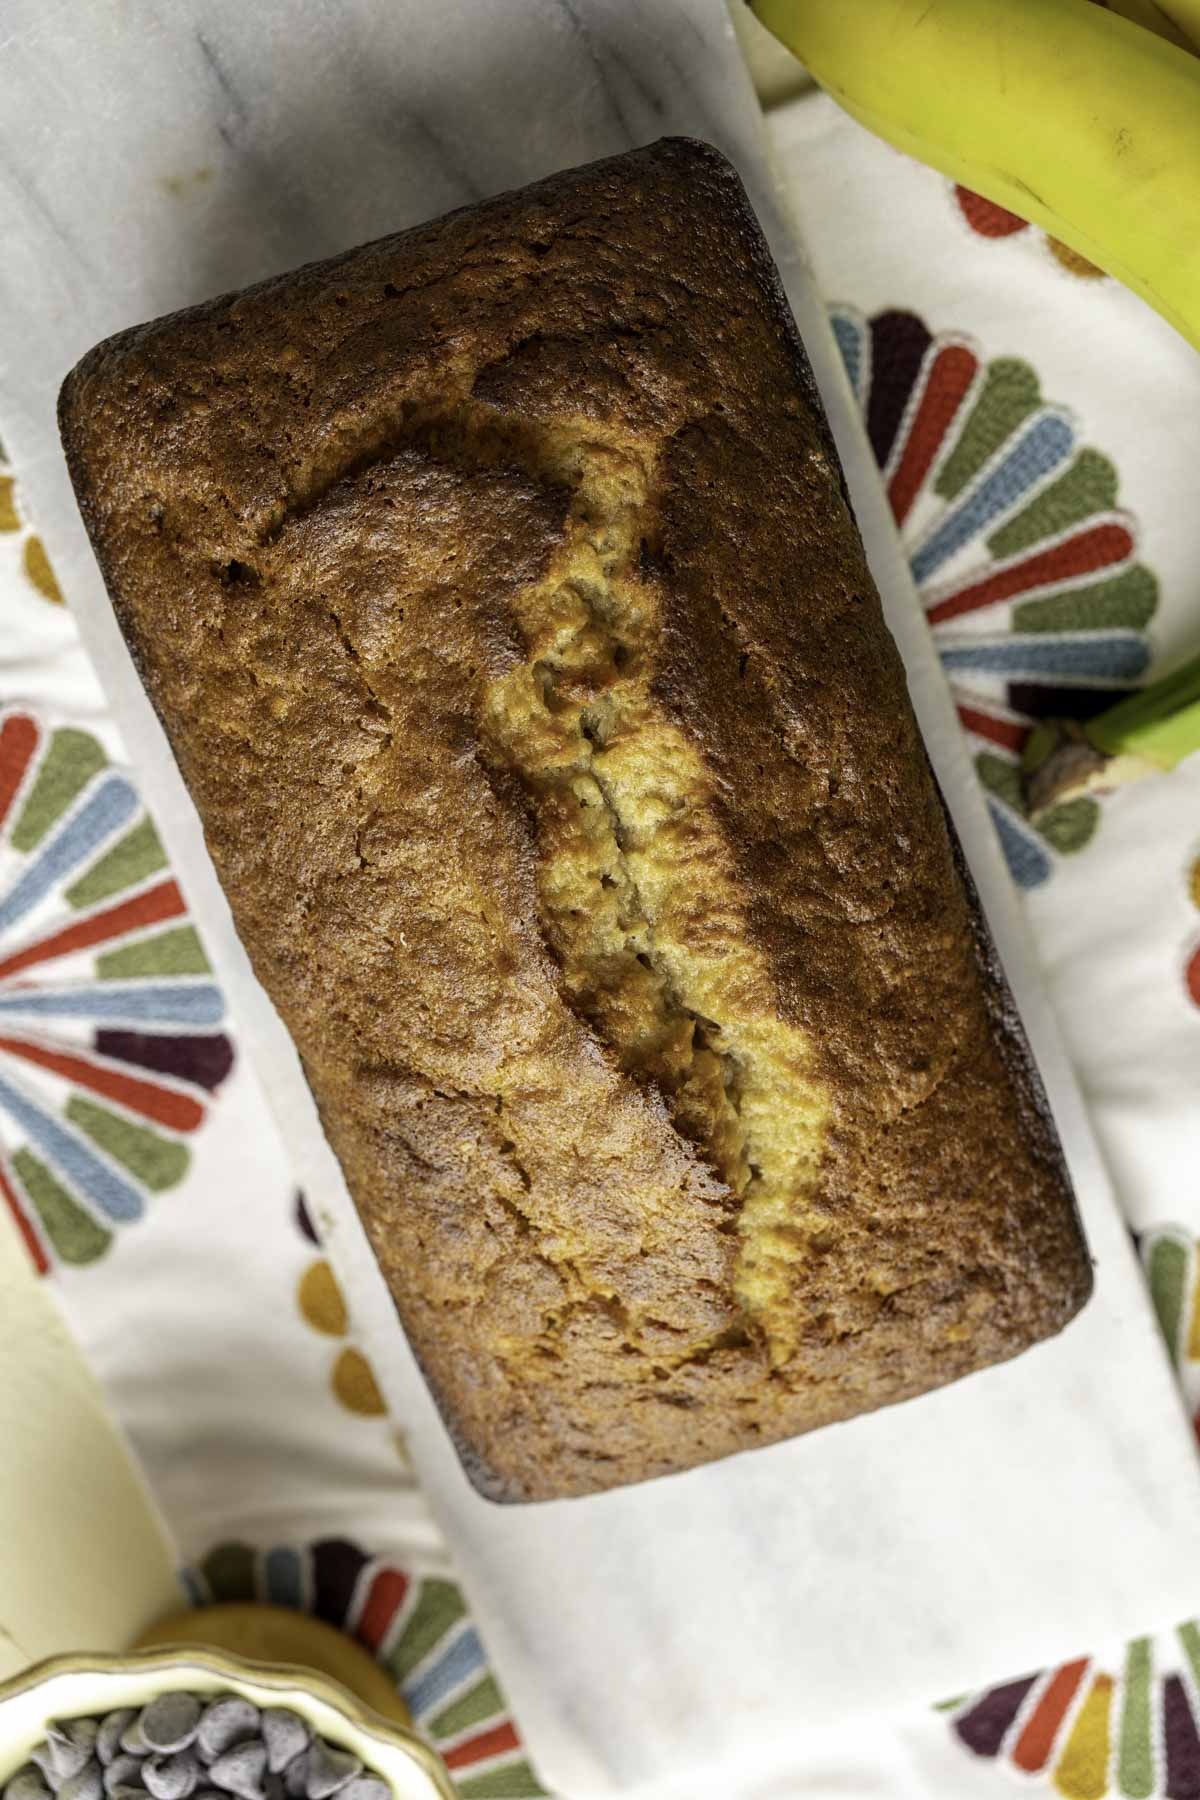 the whole loaf of a baked banana bread without baking soda placed on a decorative marble slab.